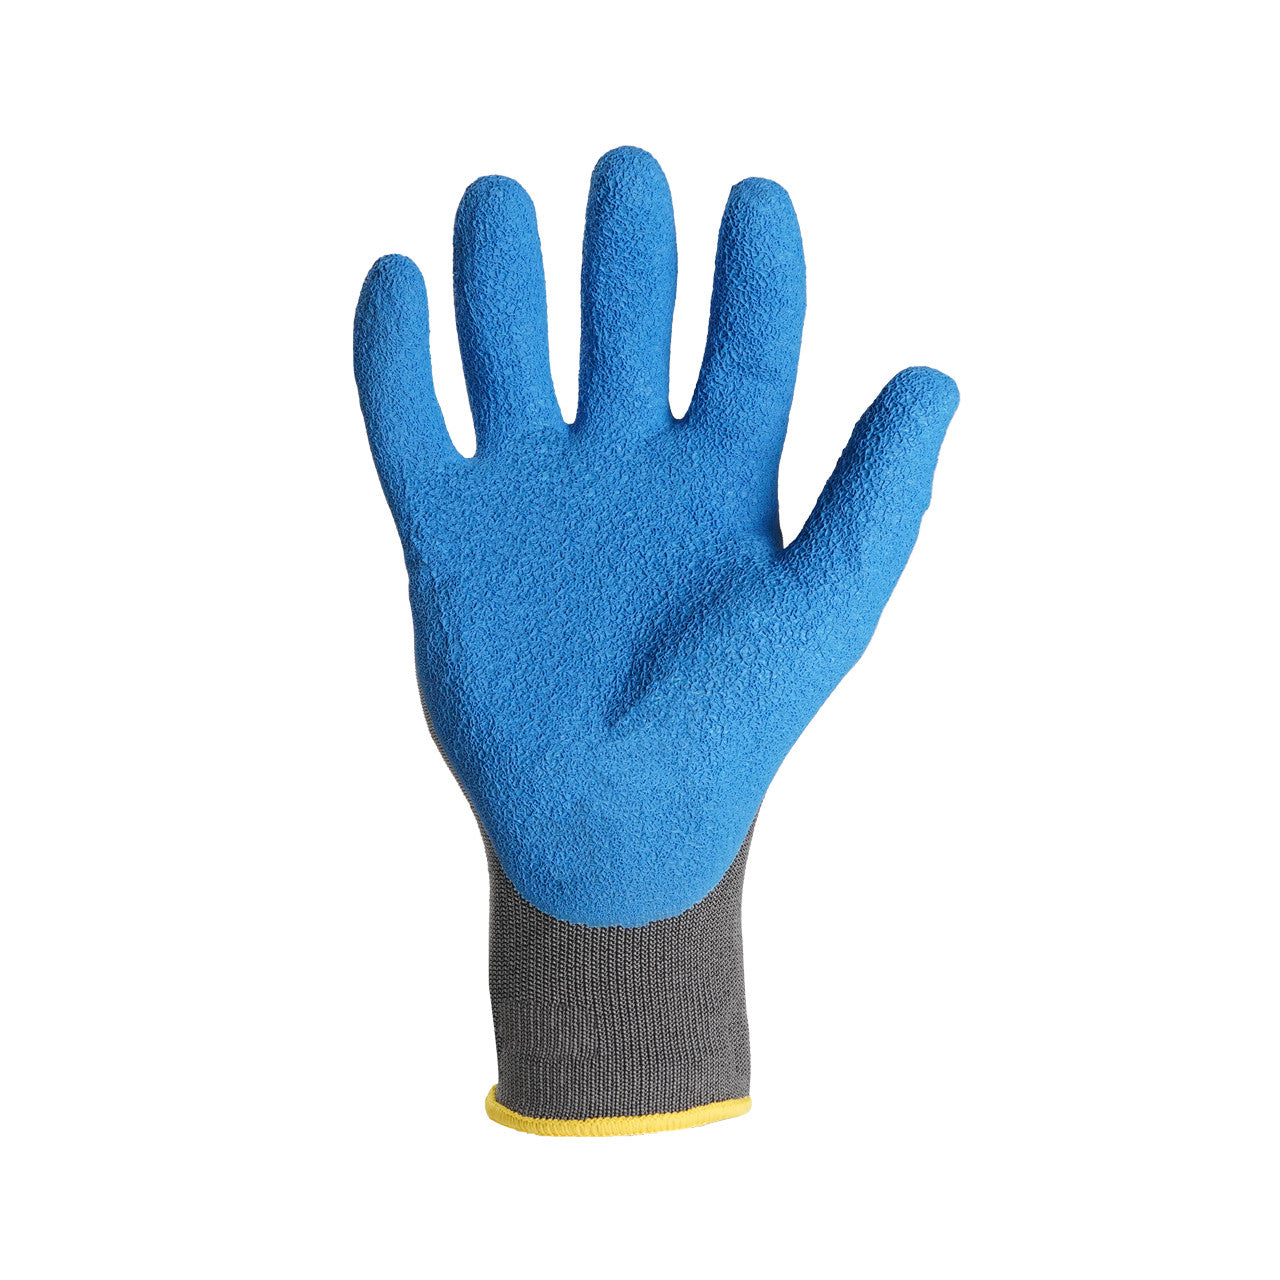 Ironclad Crinkle Lates A1 Glove Grey/Blue-eSafety Supplies, Inc